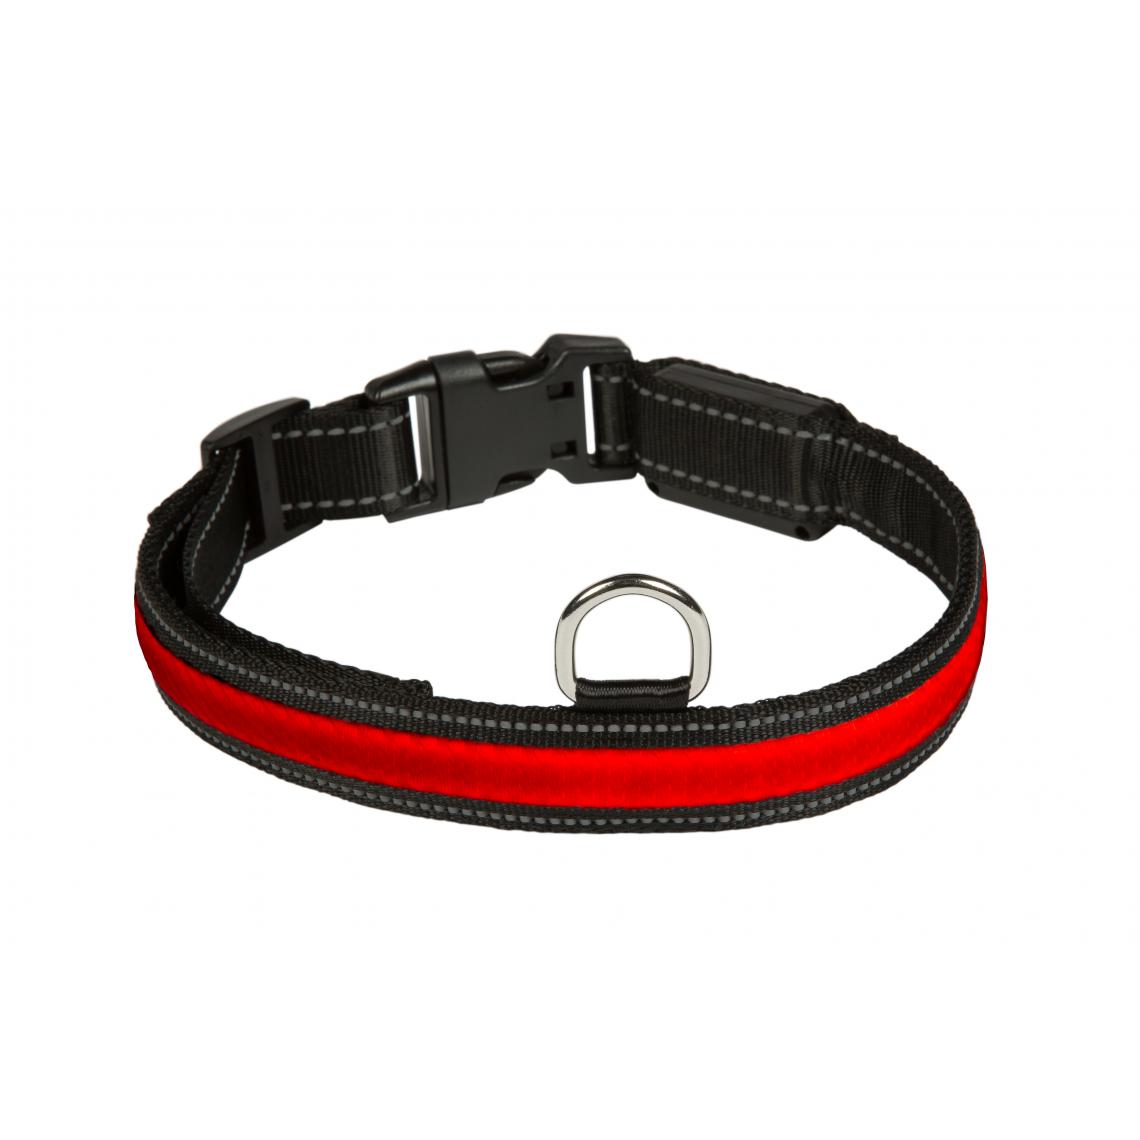 Eyenimal - Collier lumineux rouge EYENIMAL - Taille S - Collier pour chien